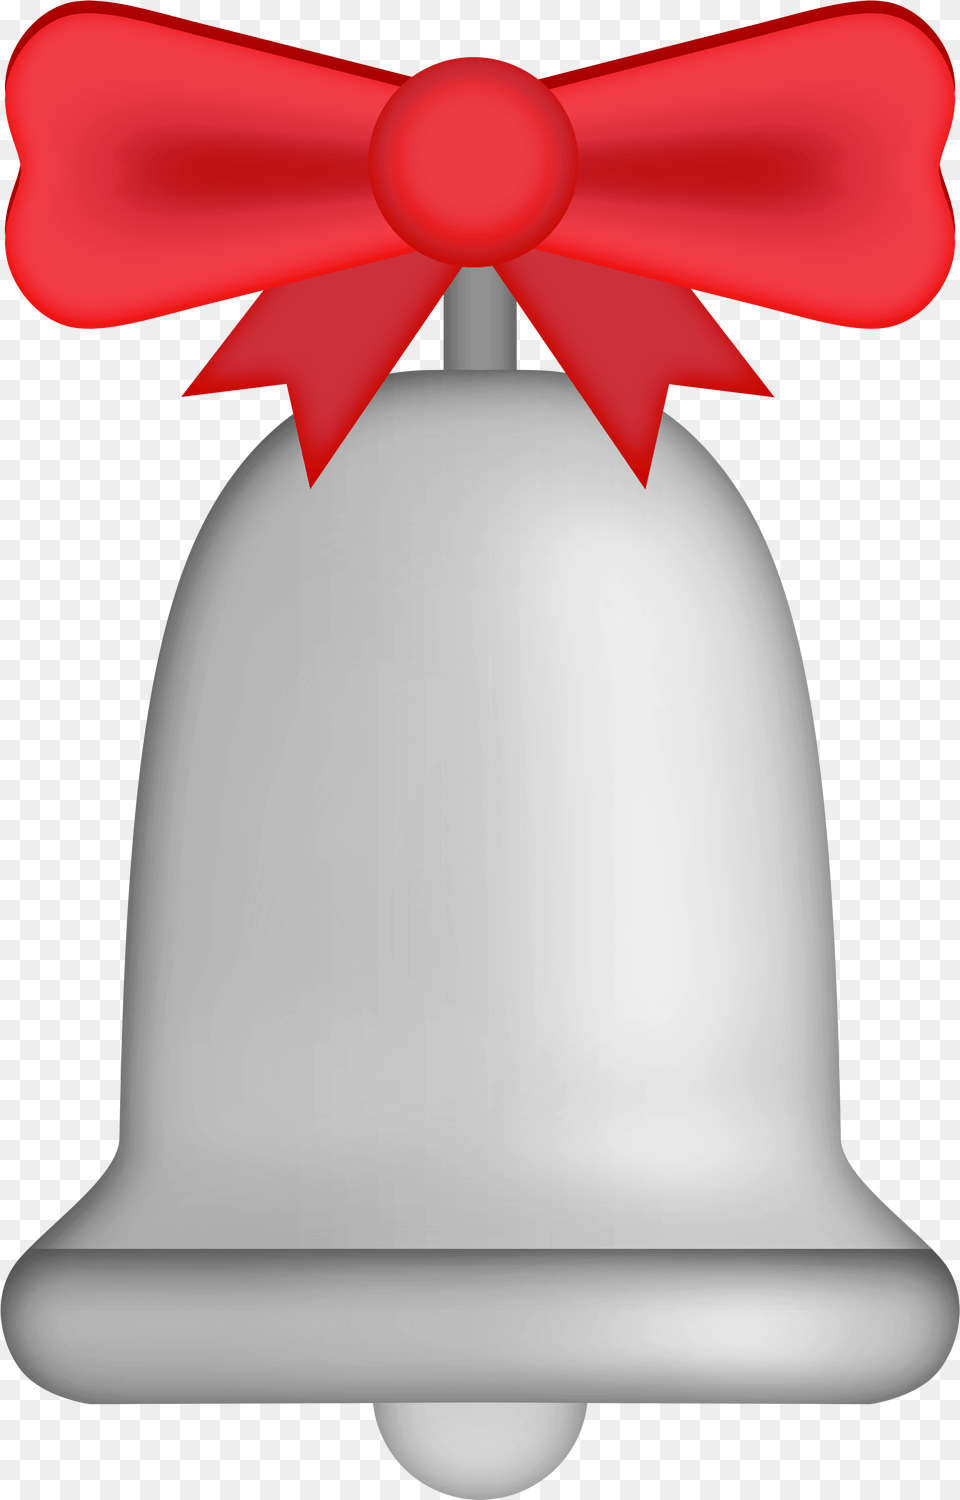 Silver Christmas Bell Clip Art Silver Christmas Bells On Transparent Background, Clothing, Hardhat, Helmet Png